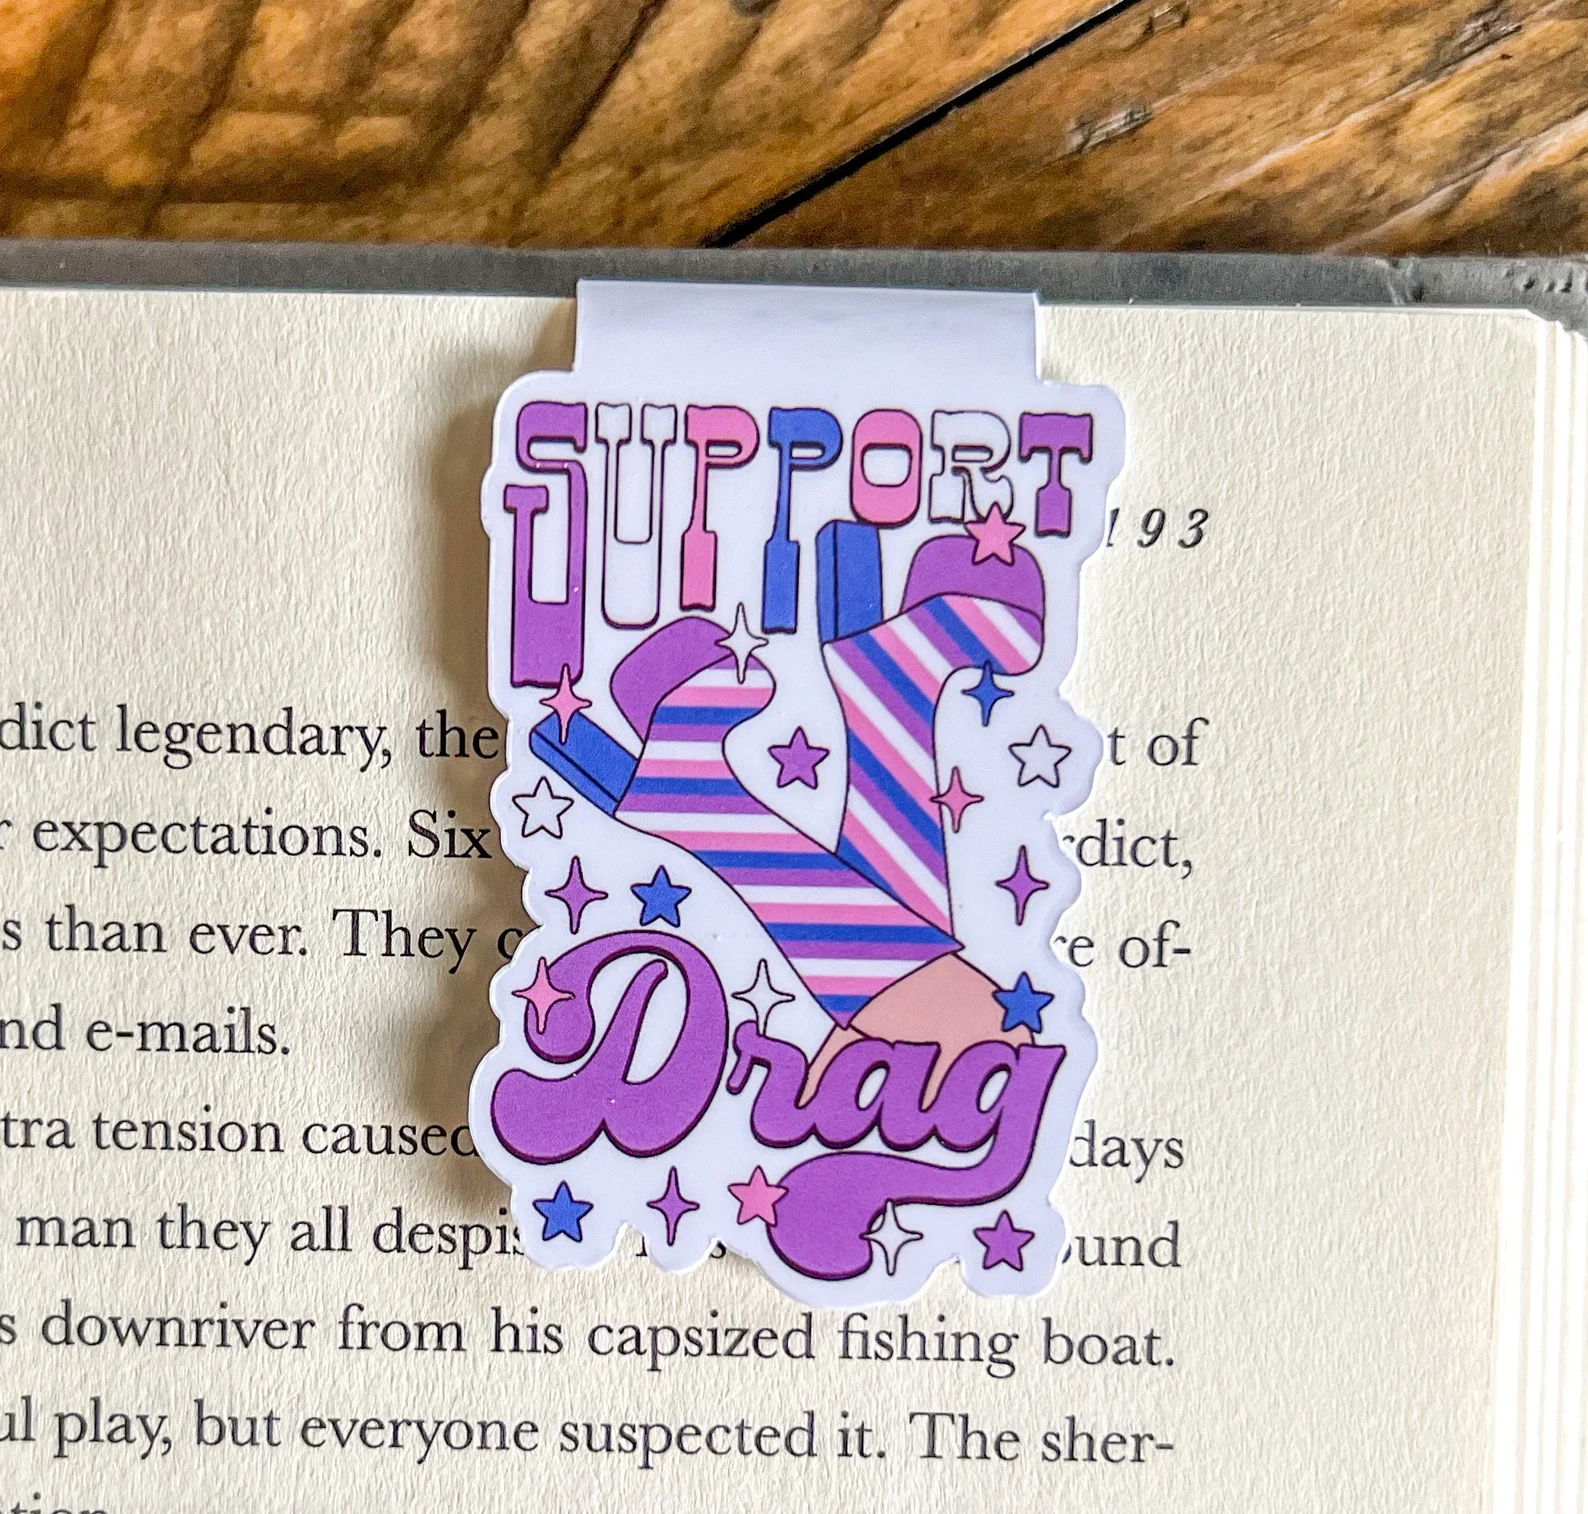 Image of a magnetic bookmark that says "support drag."